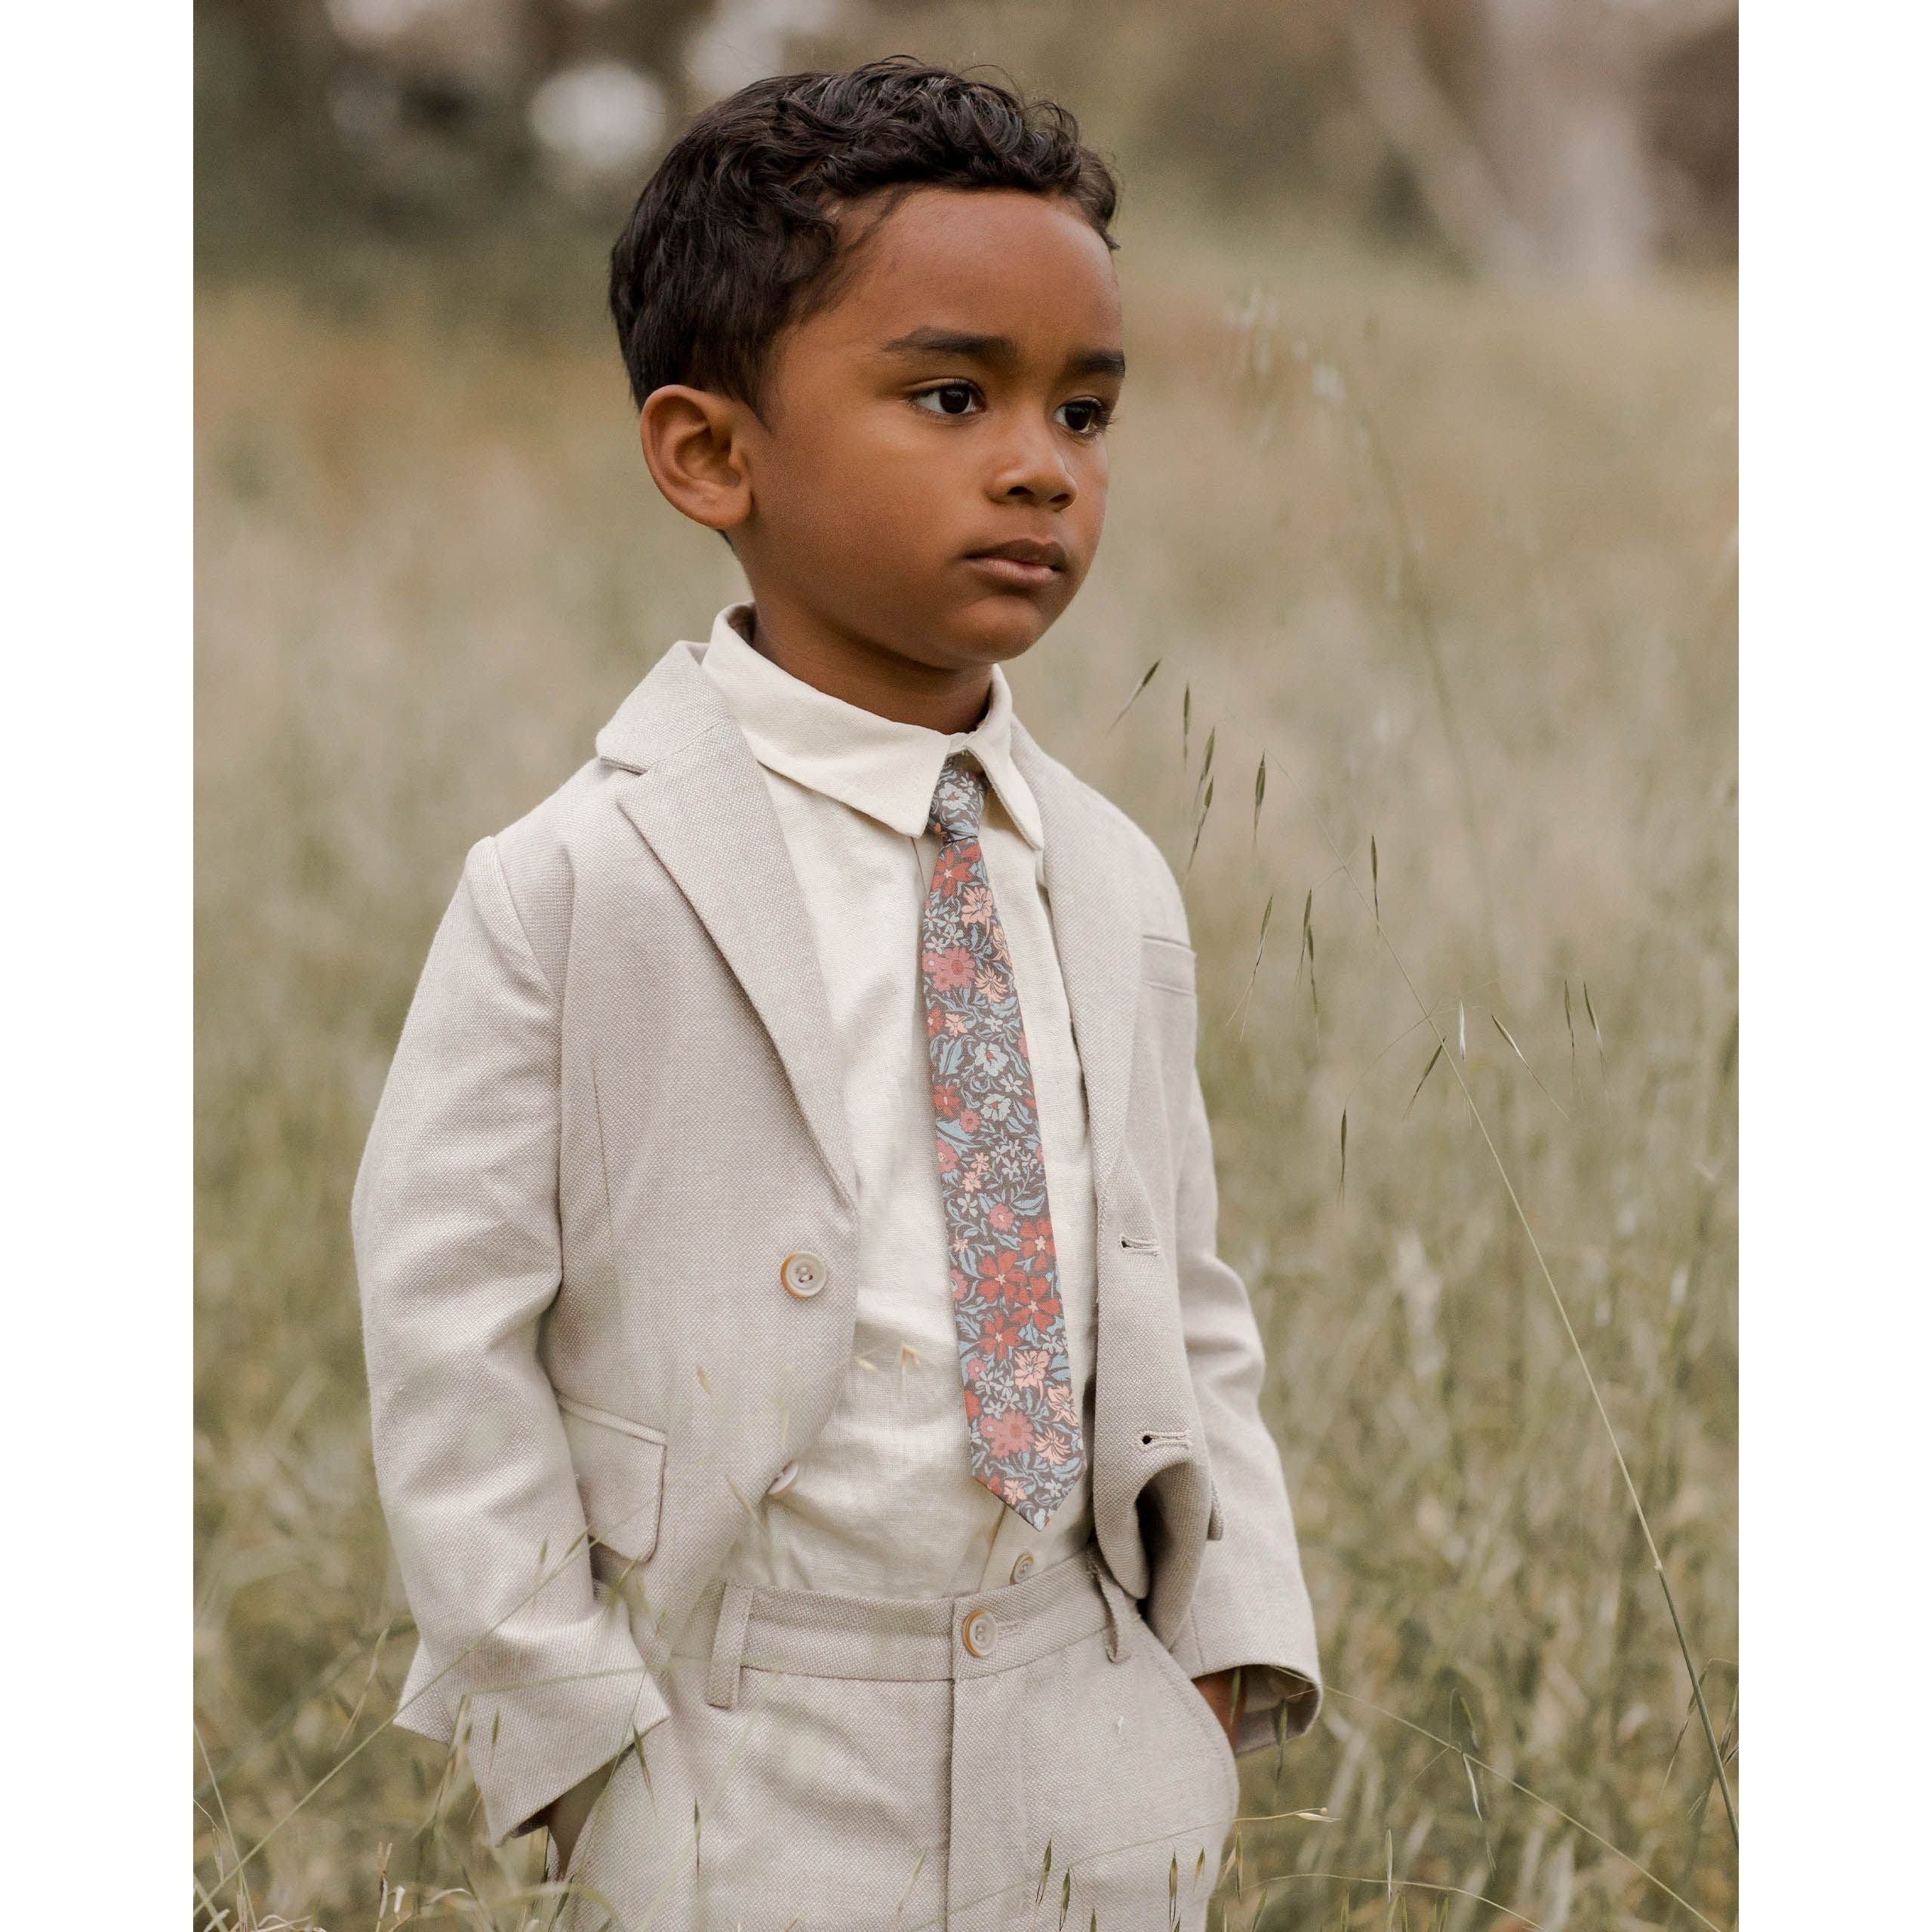 boy wearing navy colored skinny tie with berry garden floral print with linen suit and white button down